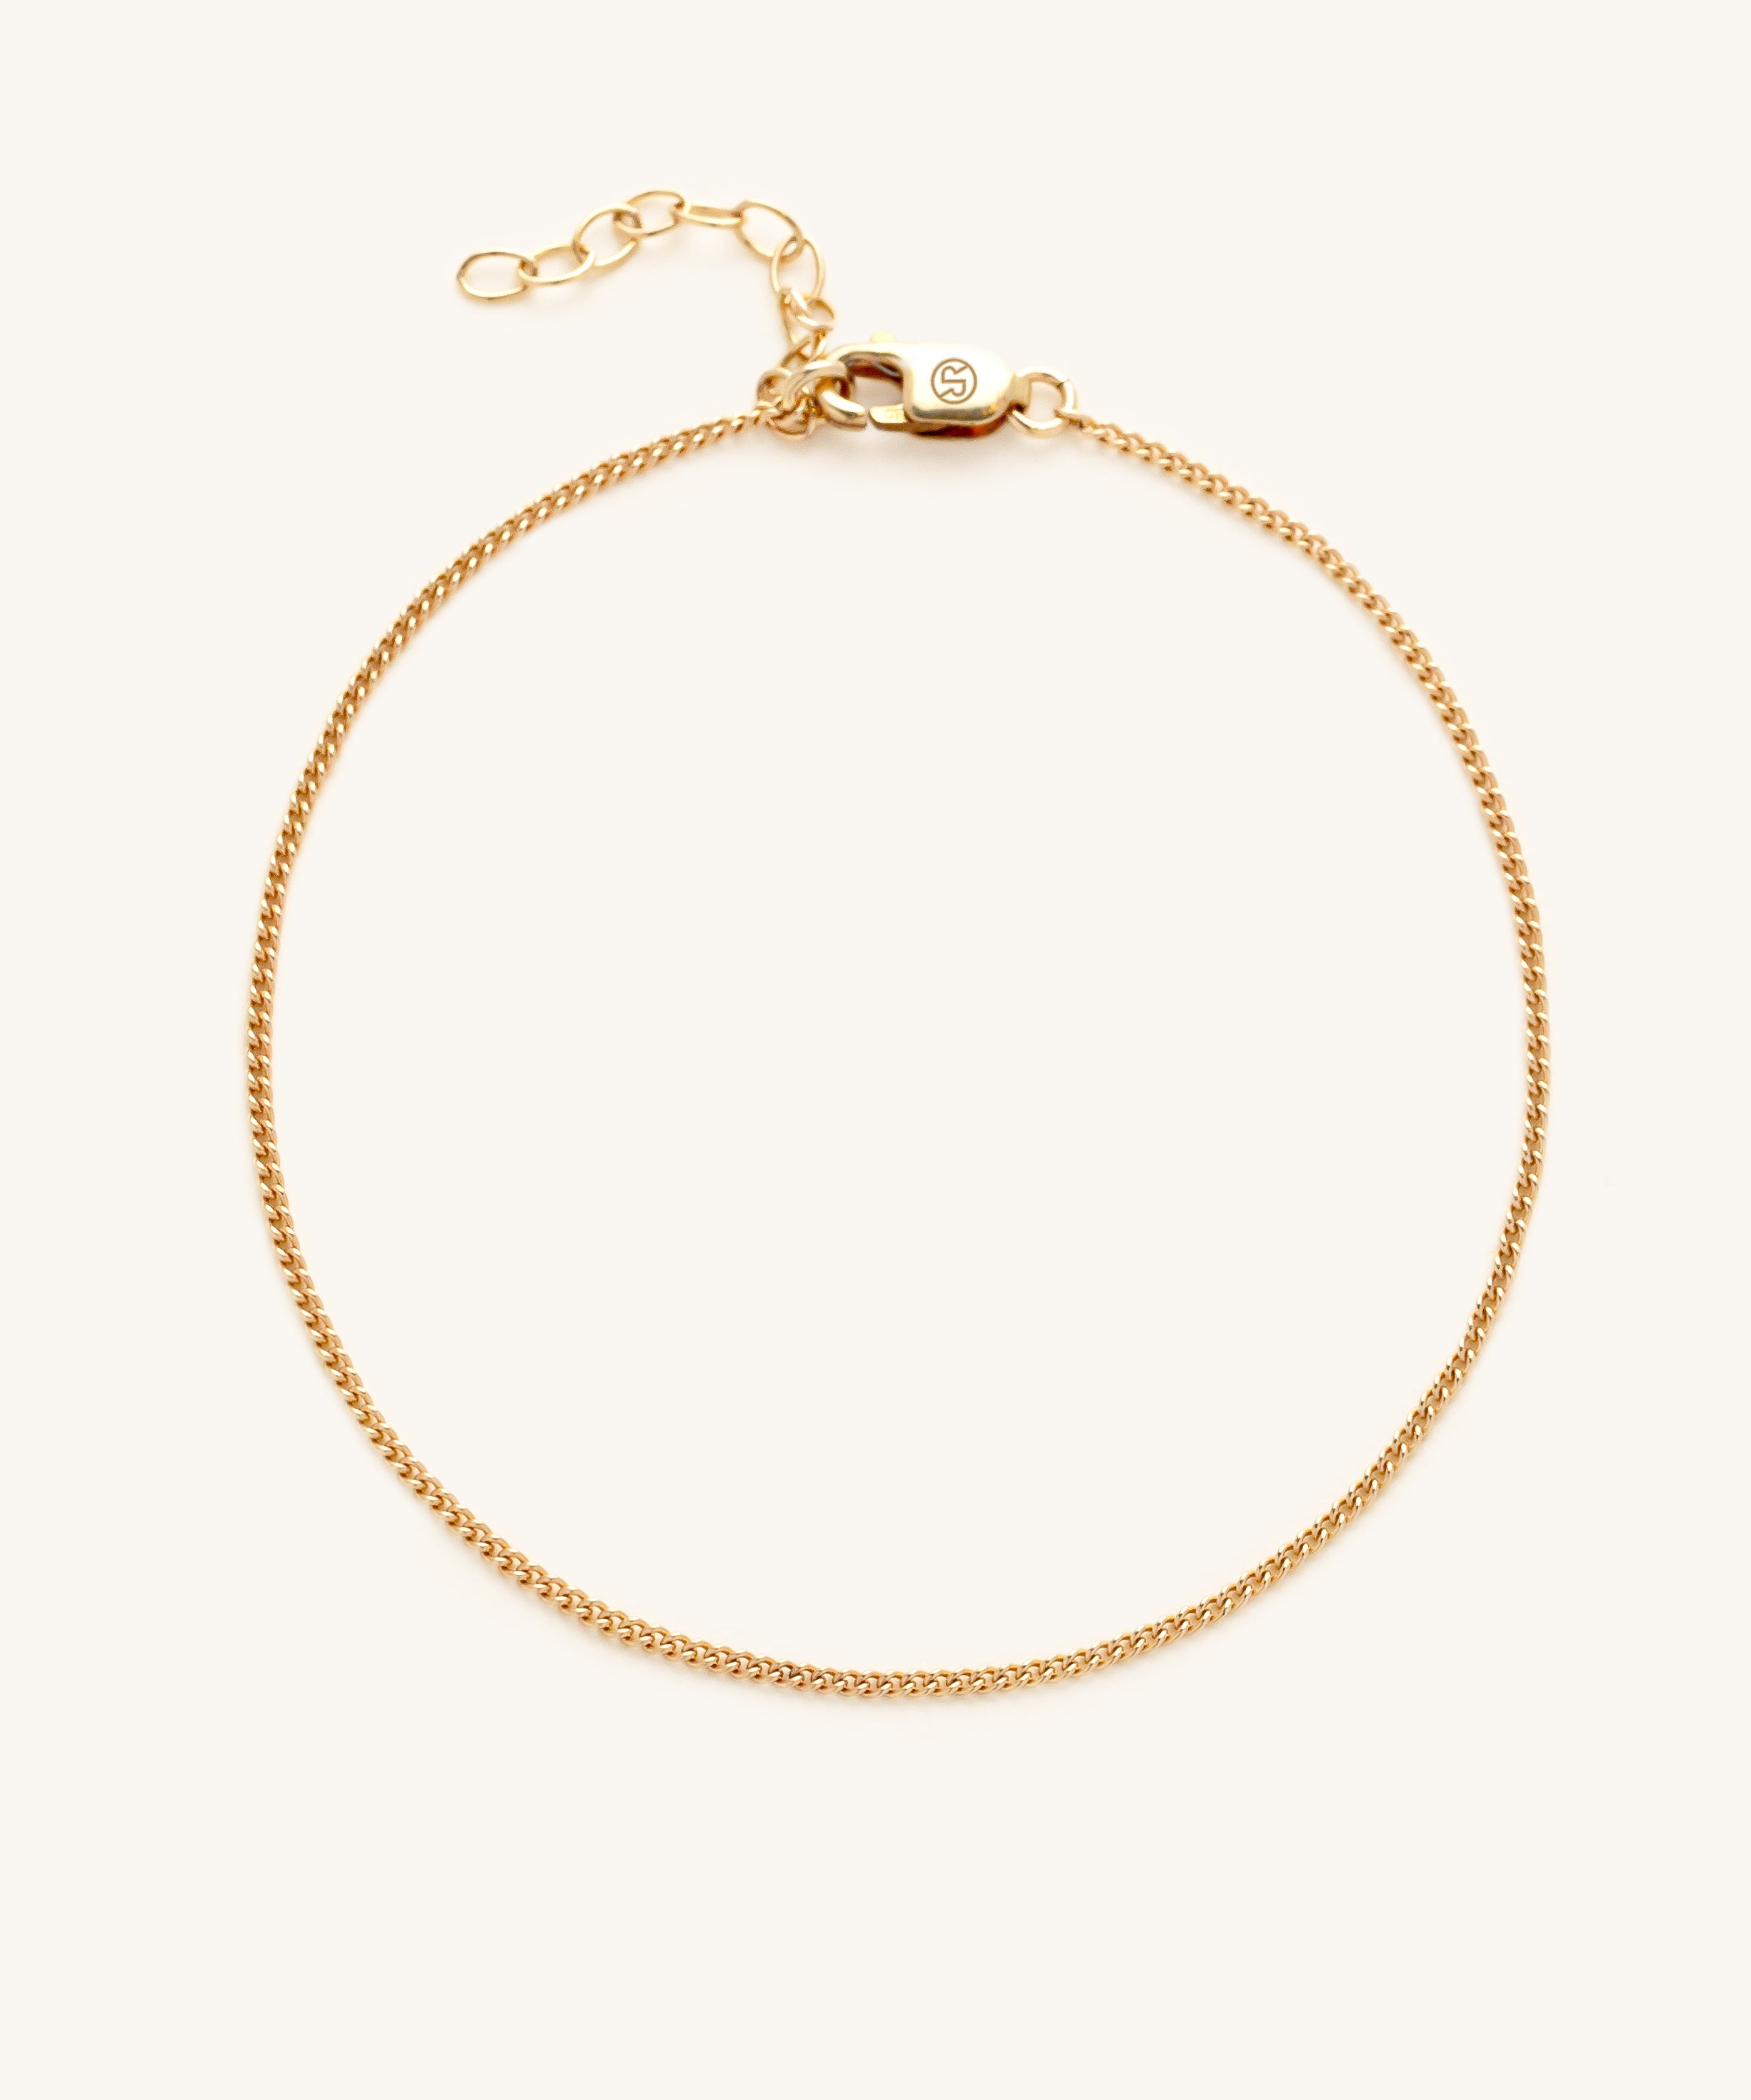 Linda Fine Curb Chain Anklet